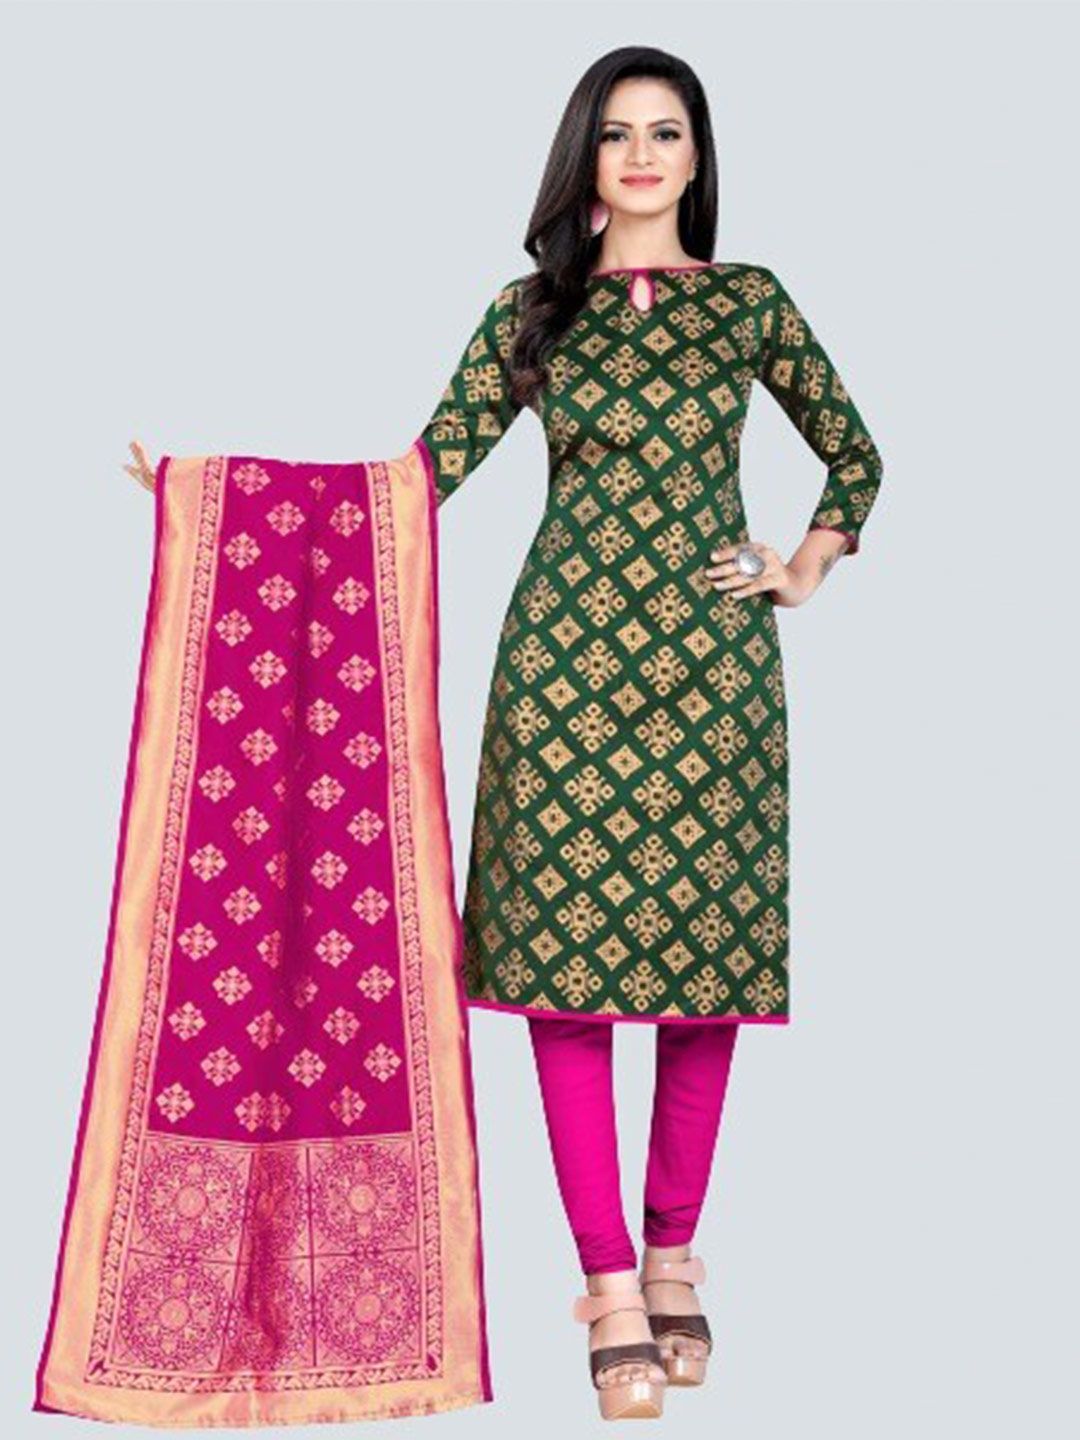 MORLY Women Green & Pink Dupion Silk Unstitched Dress Material Price in India